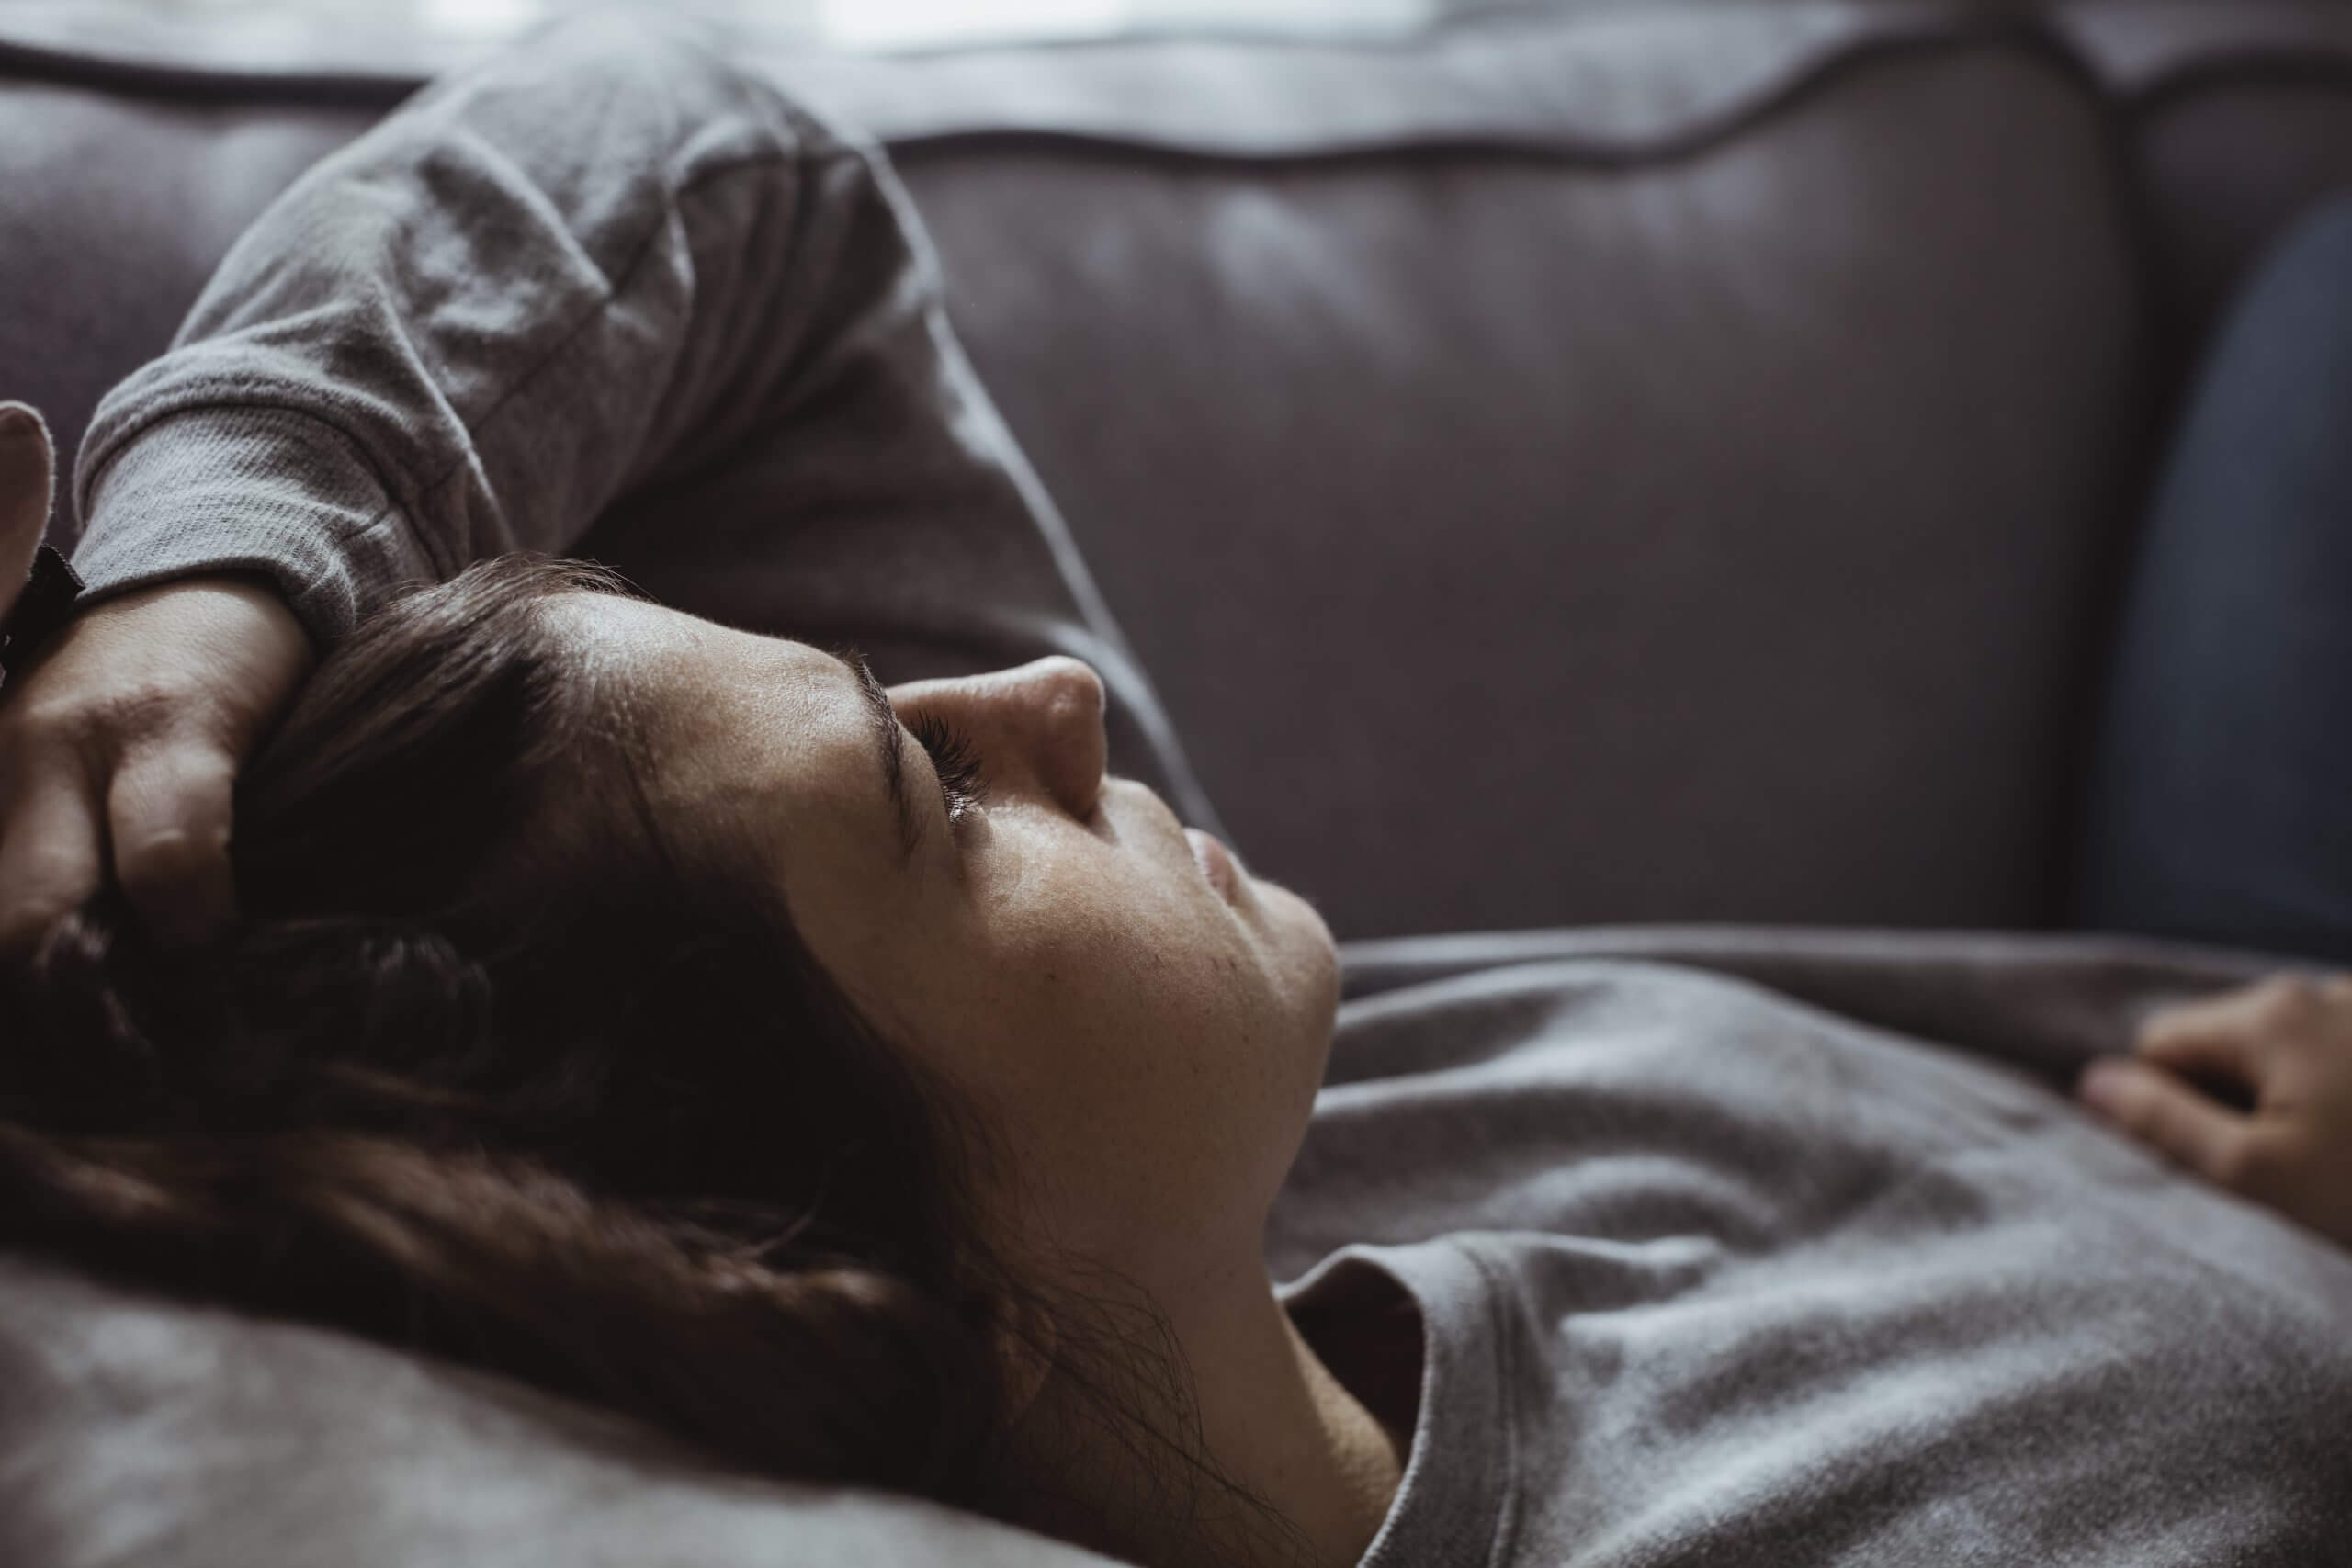 6 reasons why you feel tired all the time and how to treat each one, according to sleep experts